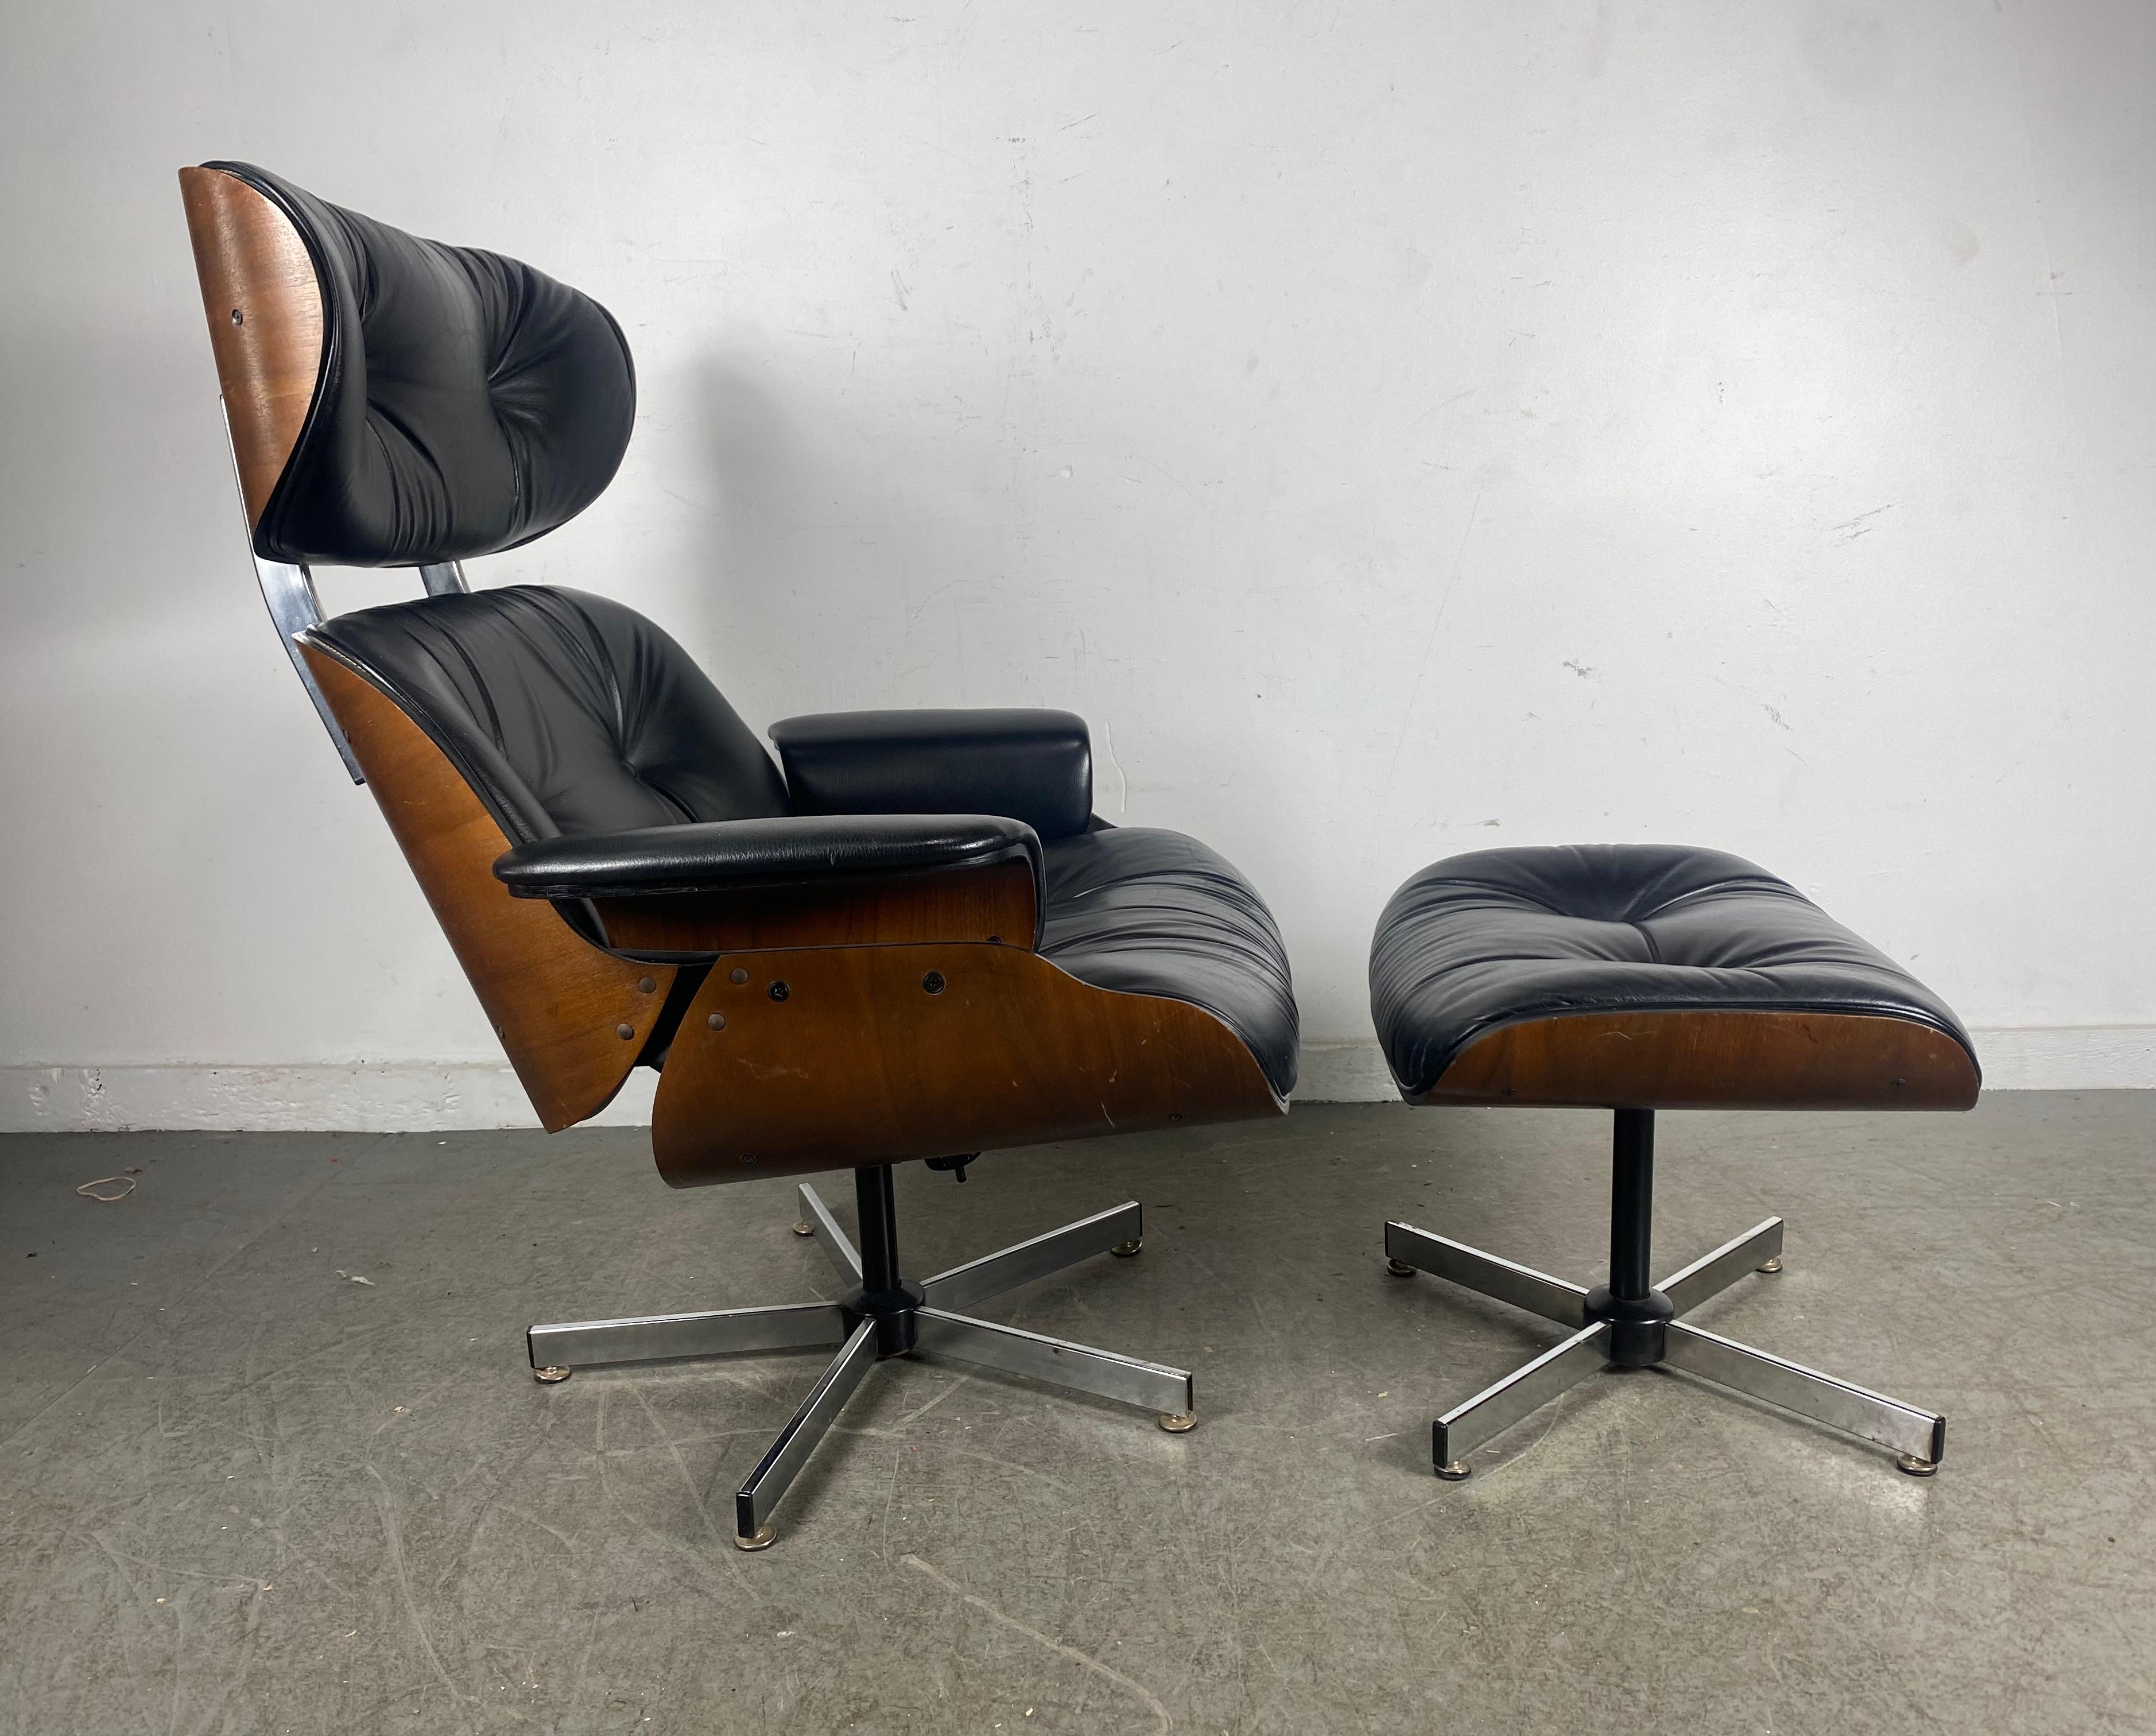 American Eames Style Lounge Chair and Ottoman, Leather, Plycraft, Classic Modernist